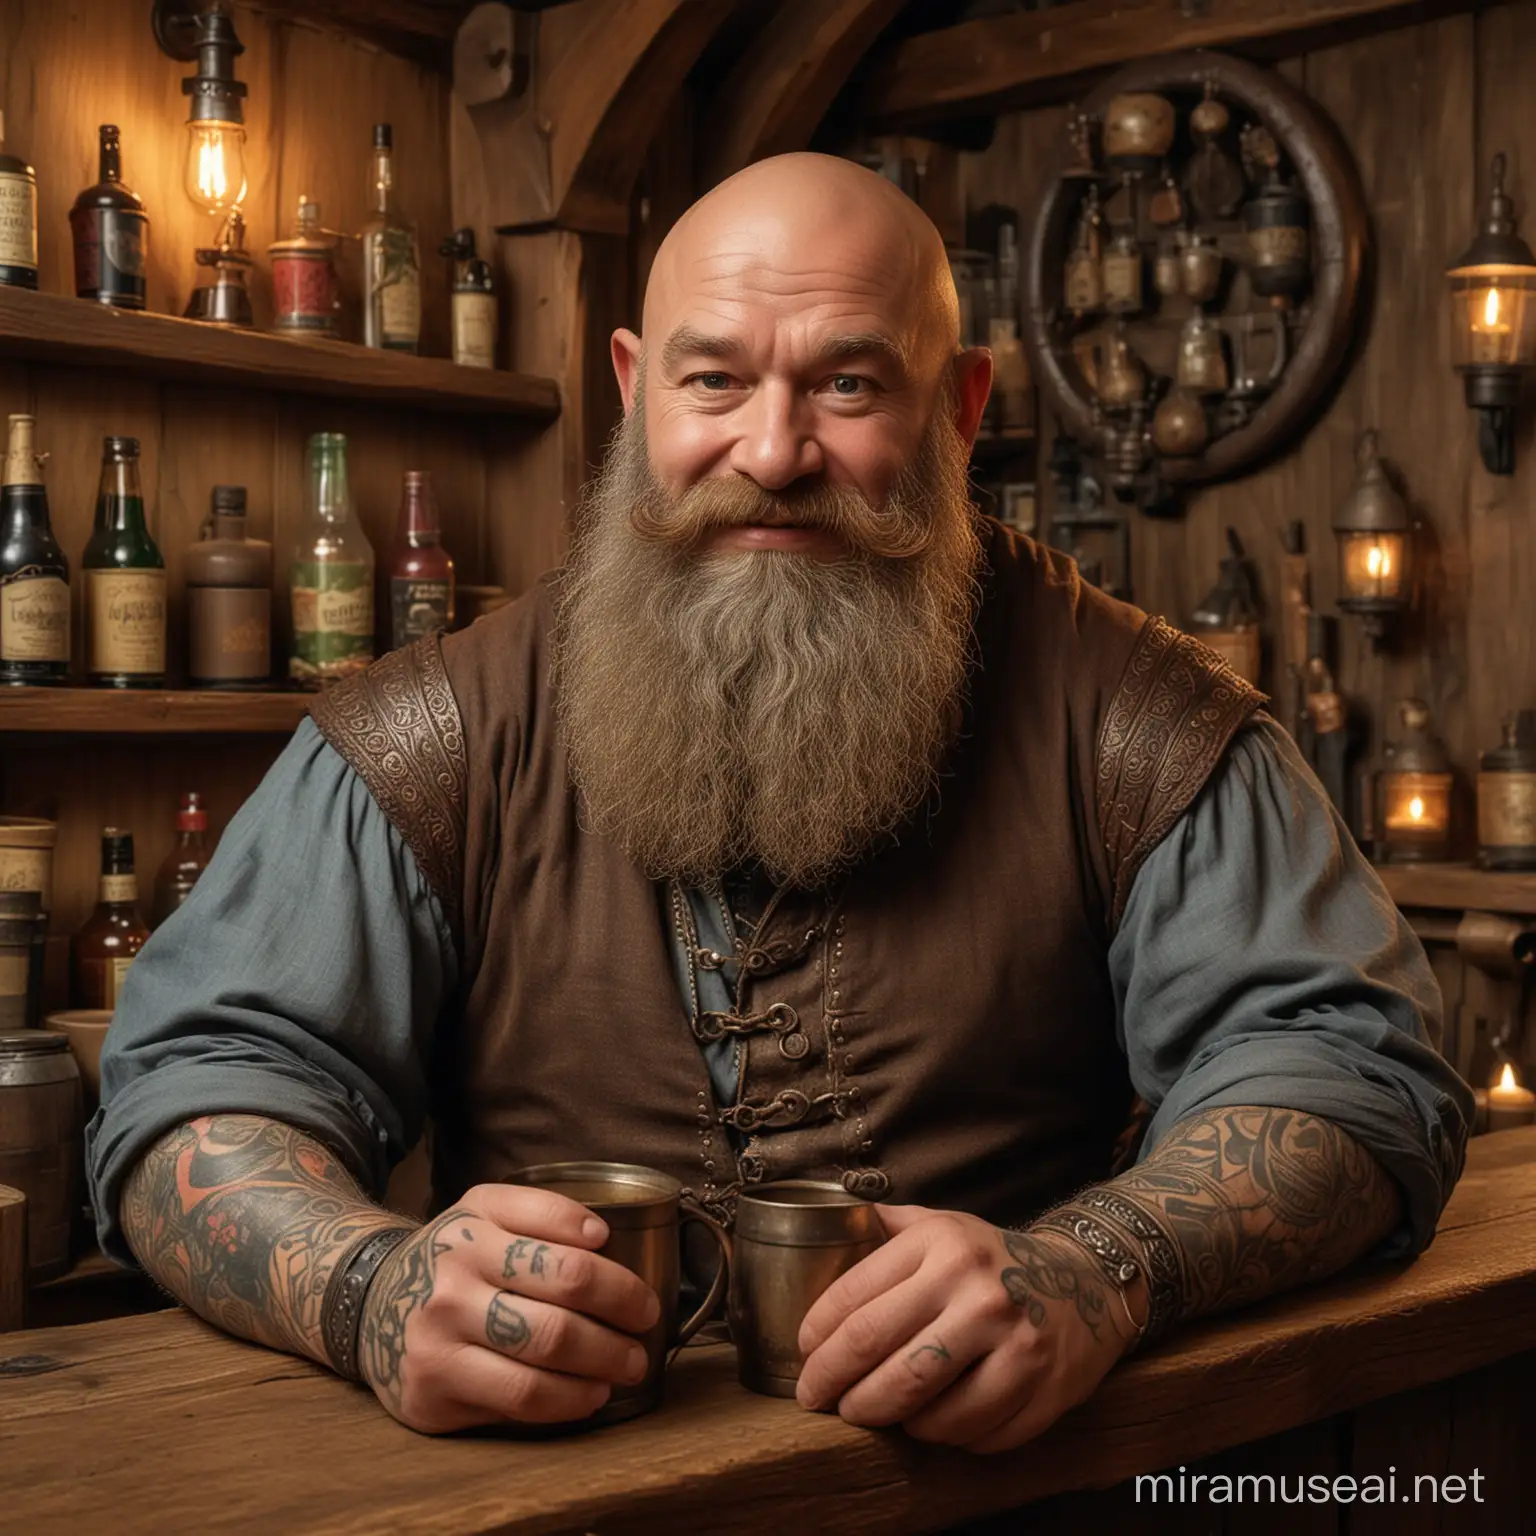 the dwarf innkeeper stands behind the bar, rubbing a wooden mug with metal rings on it, the dwarf has a lush bronze beard, a bald head and his body is covered with ritual tattoos, behind him there is a wall with different drinks, there is a pleasant warm light in the tavern